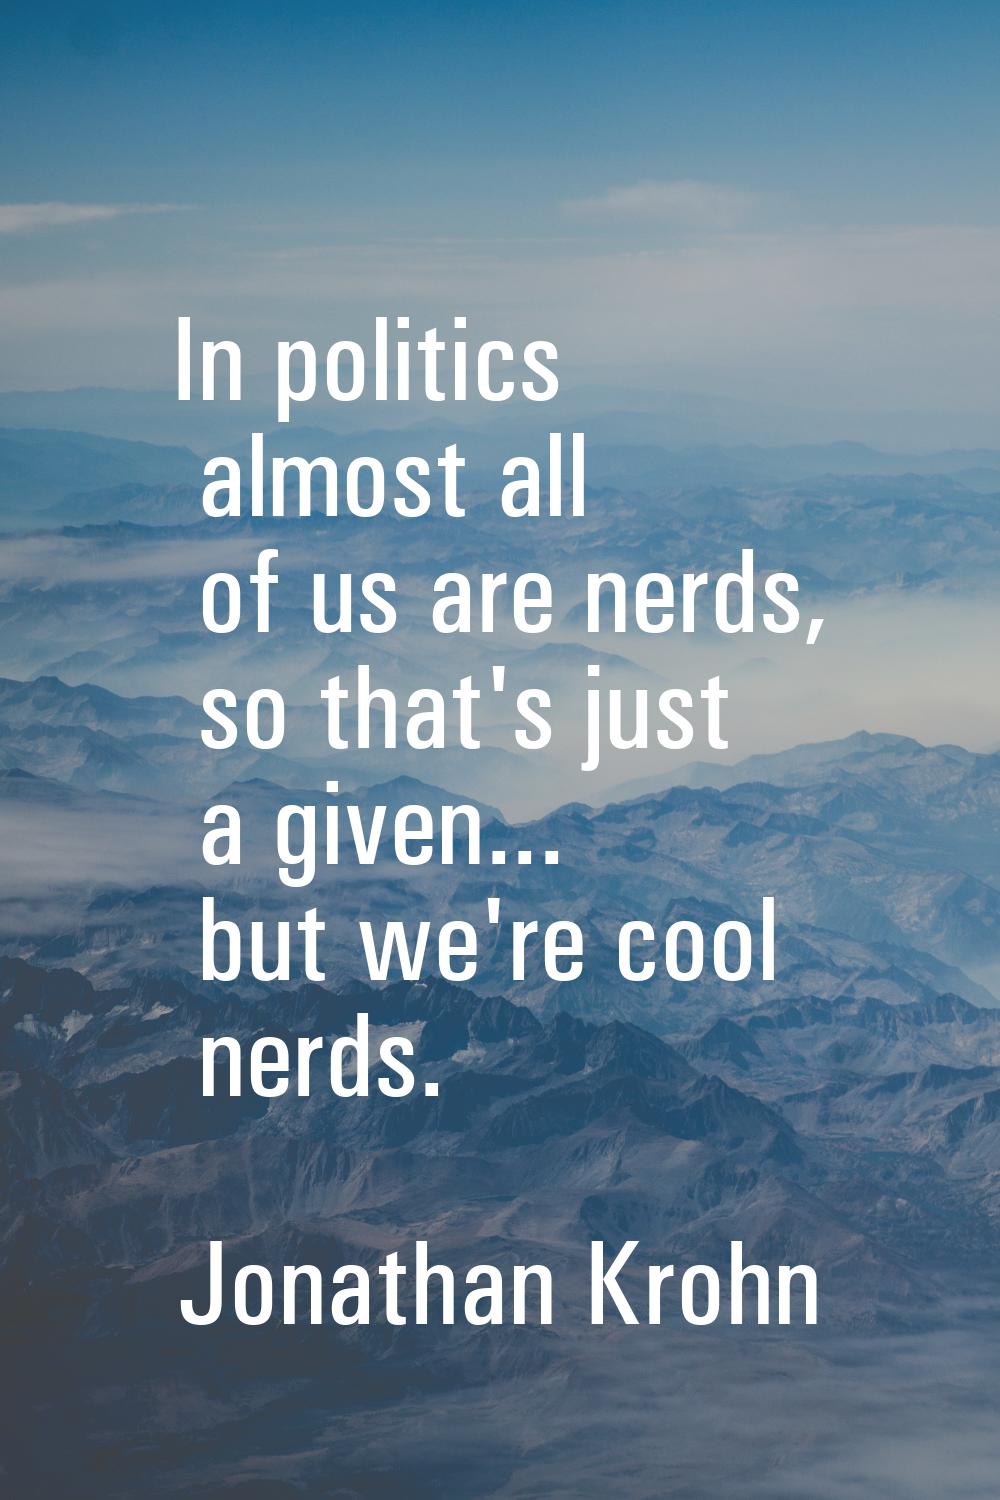 In politics almost all of us are nerds, so that's just a given... but we're cool nerds.